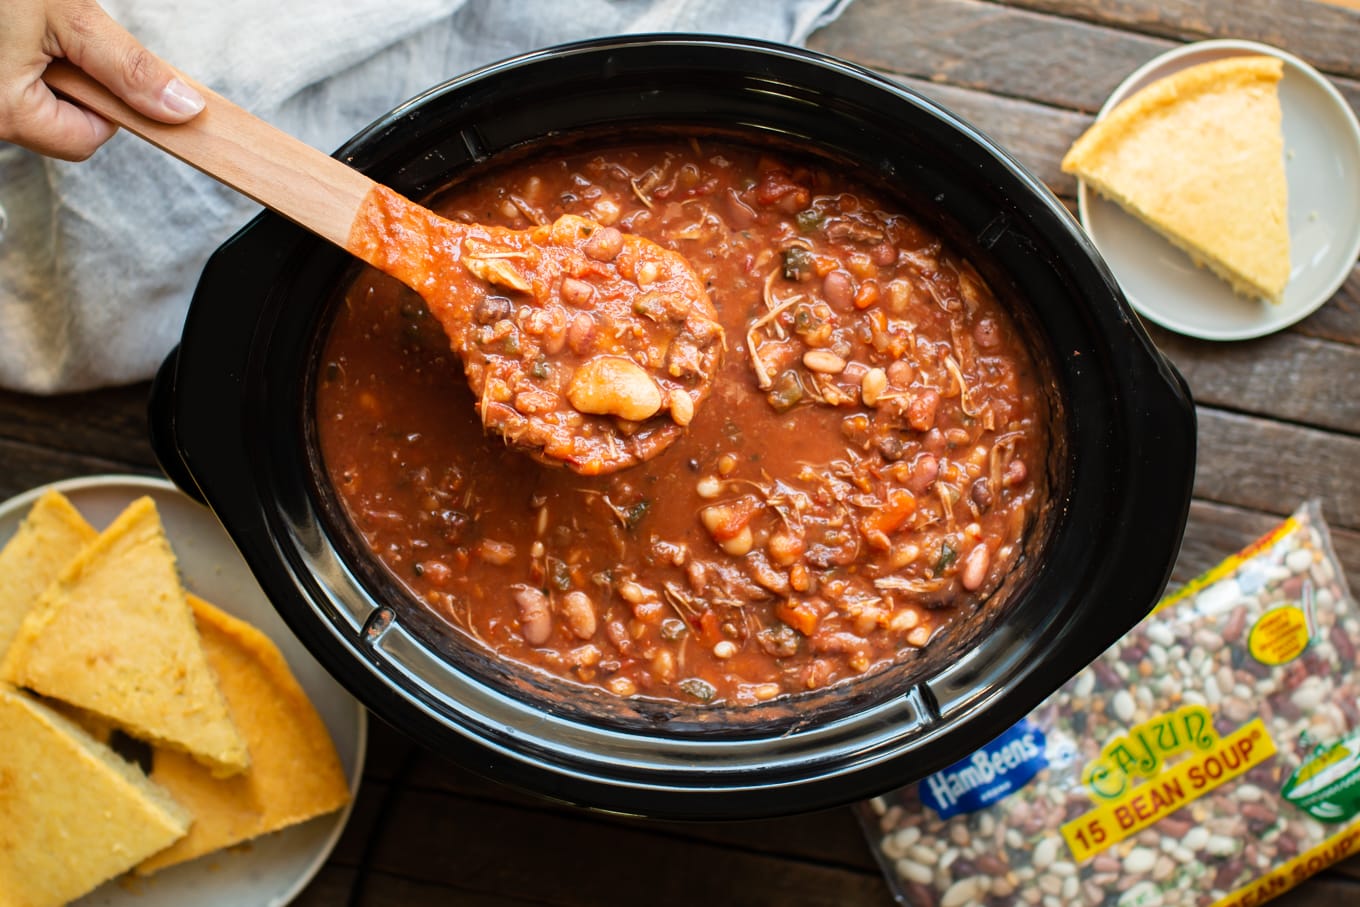 cajun 15 bean soup in a slow cooker with ladle full of soup